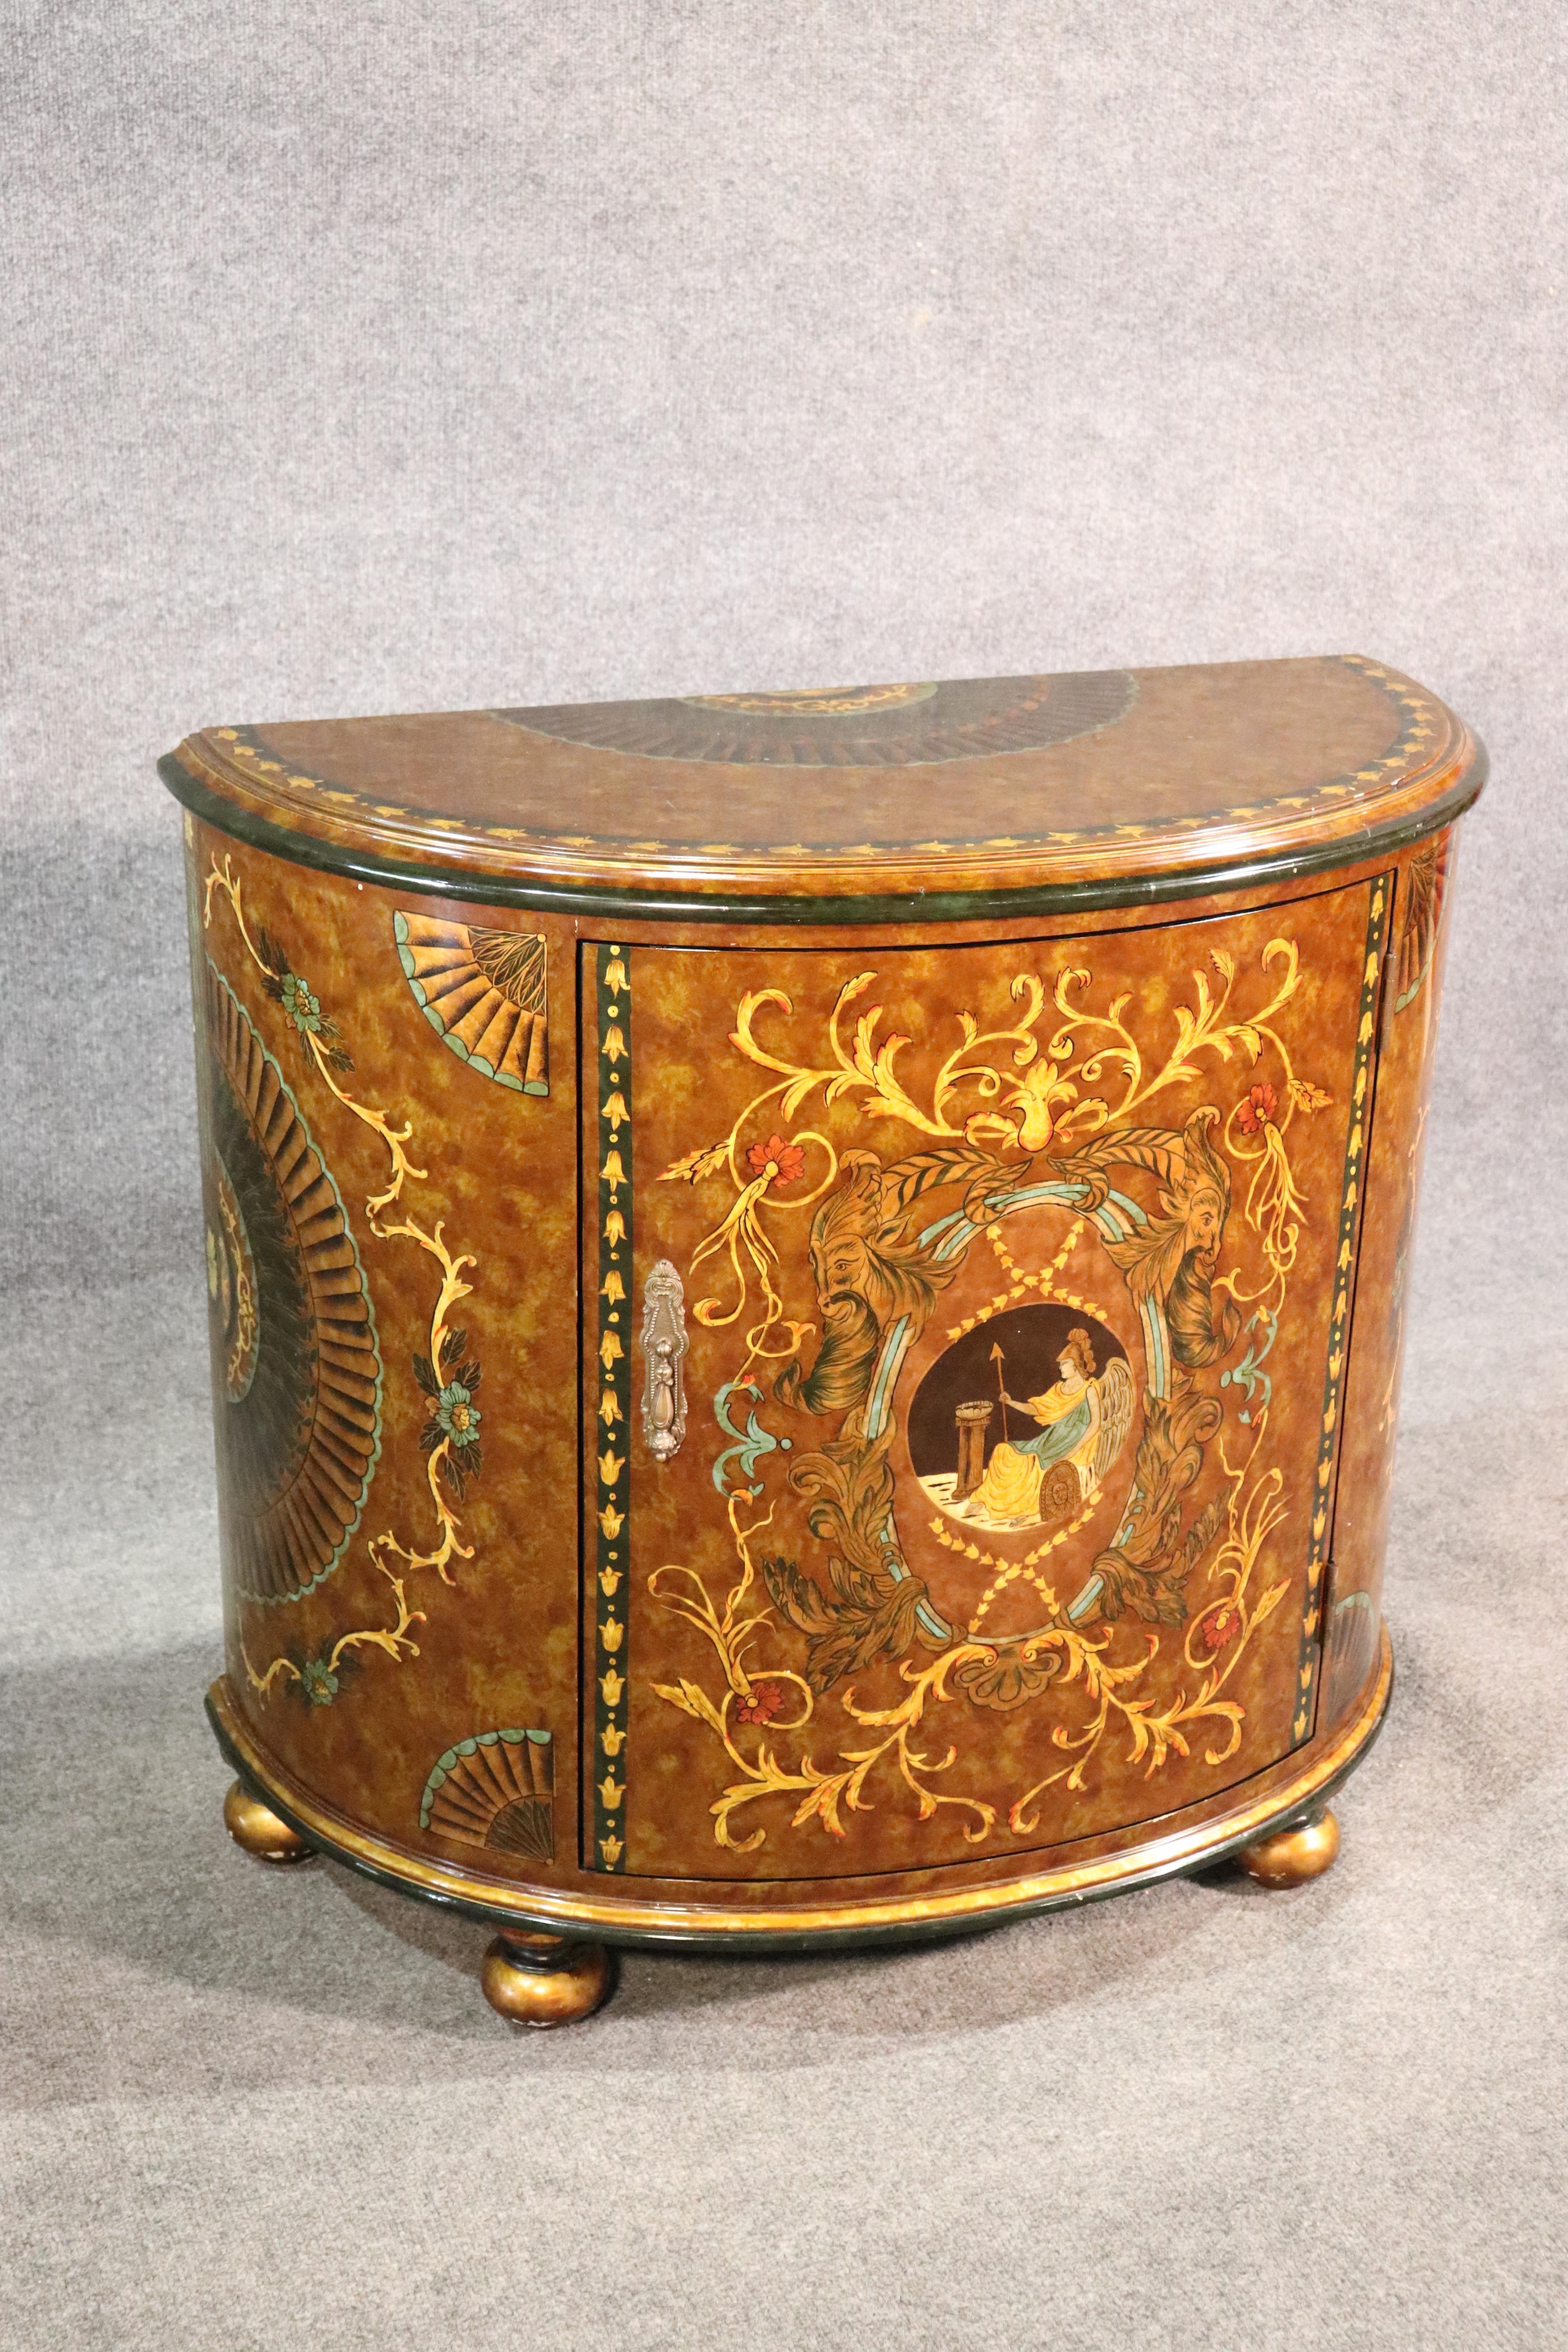 This is late 20th century Venetian style demilune commode. The painted and sgraffito decoration adds interest and wonder to a normal simple design. 

Measures: 33 tall x 36 wide x 17 deep.